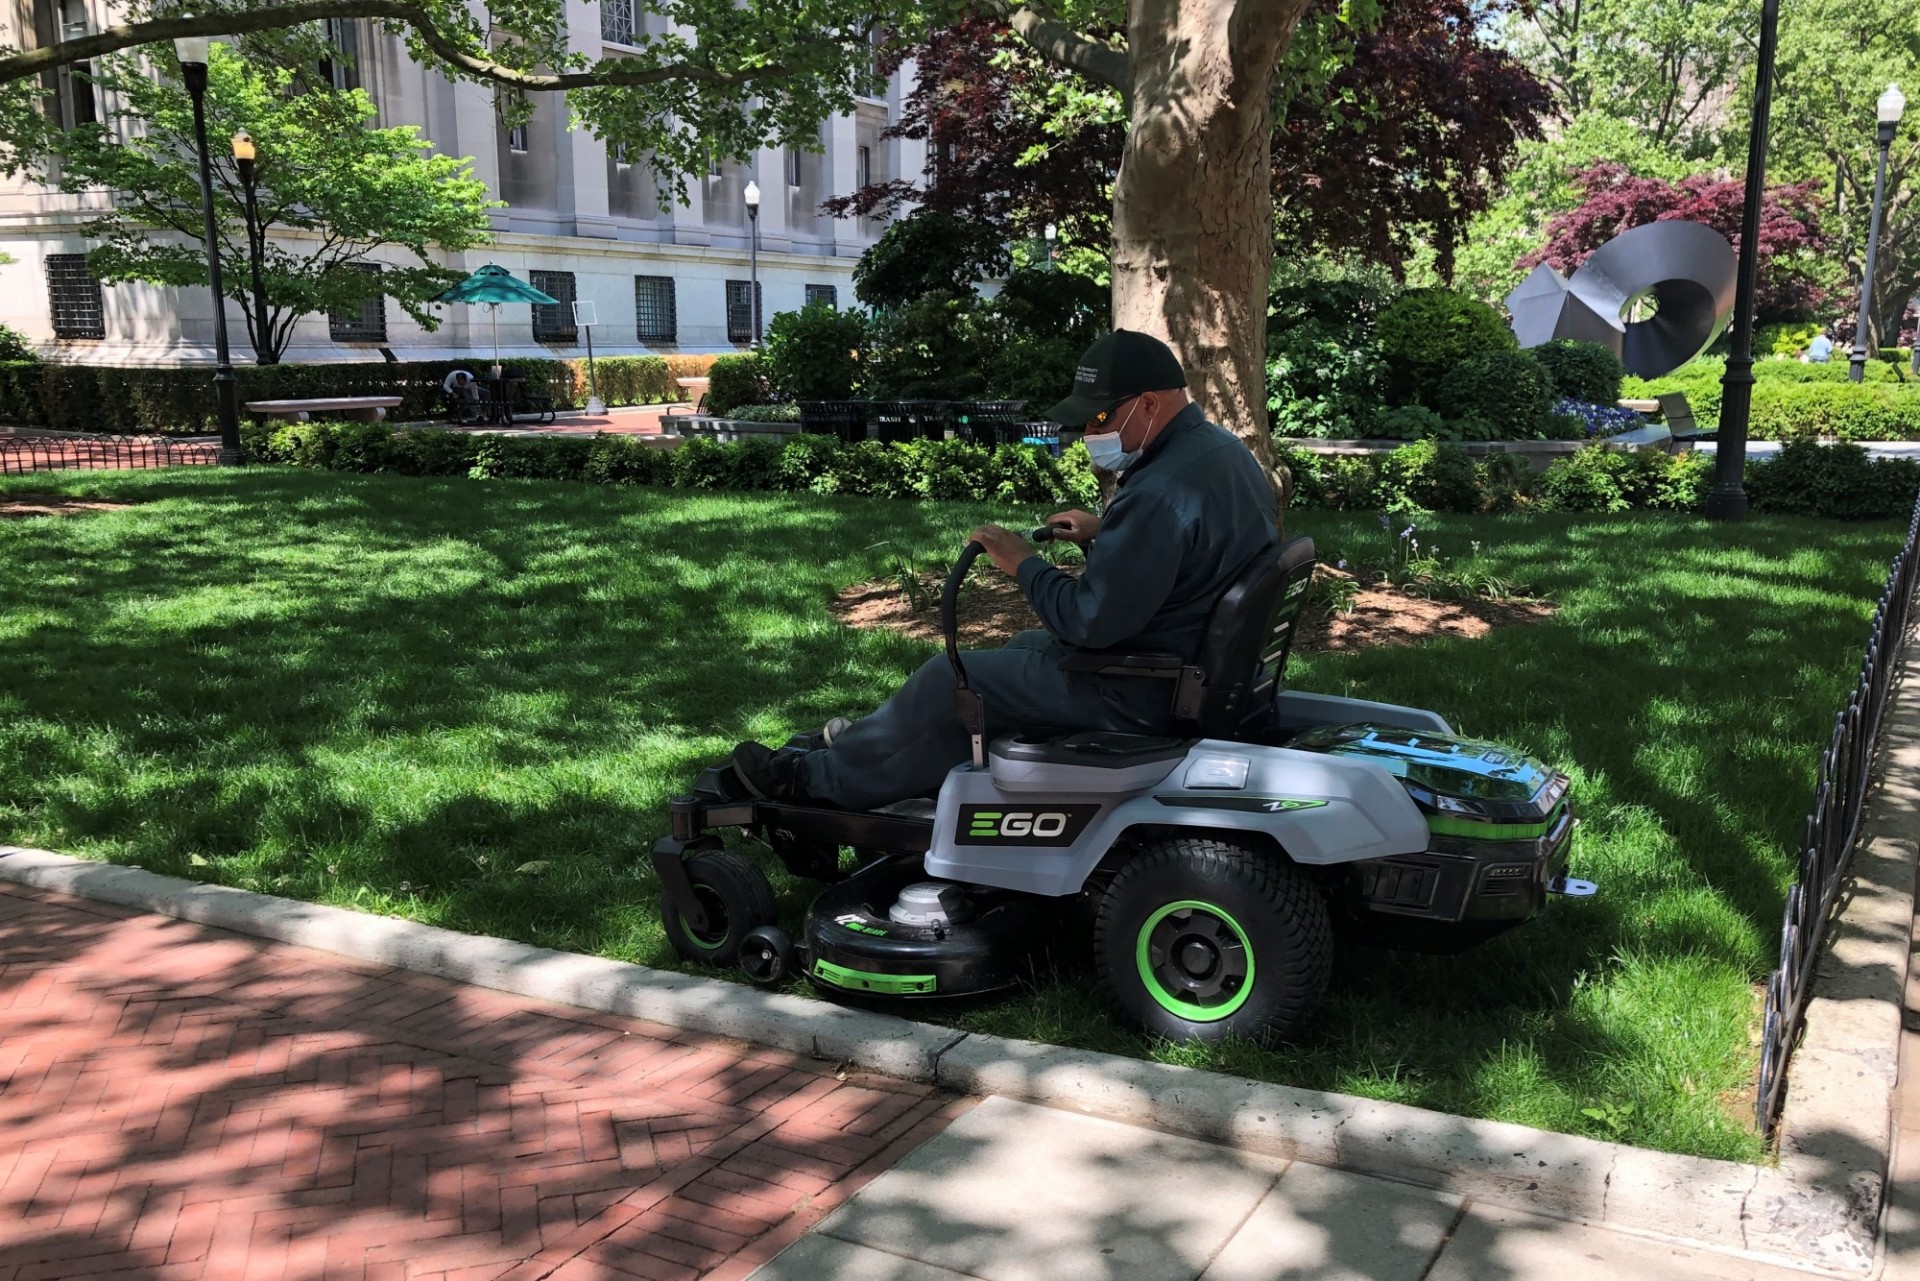 A Columbia Grounds employee cuts a small lawn with a riding electric mower.